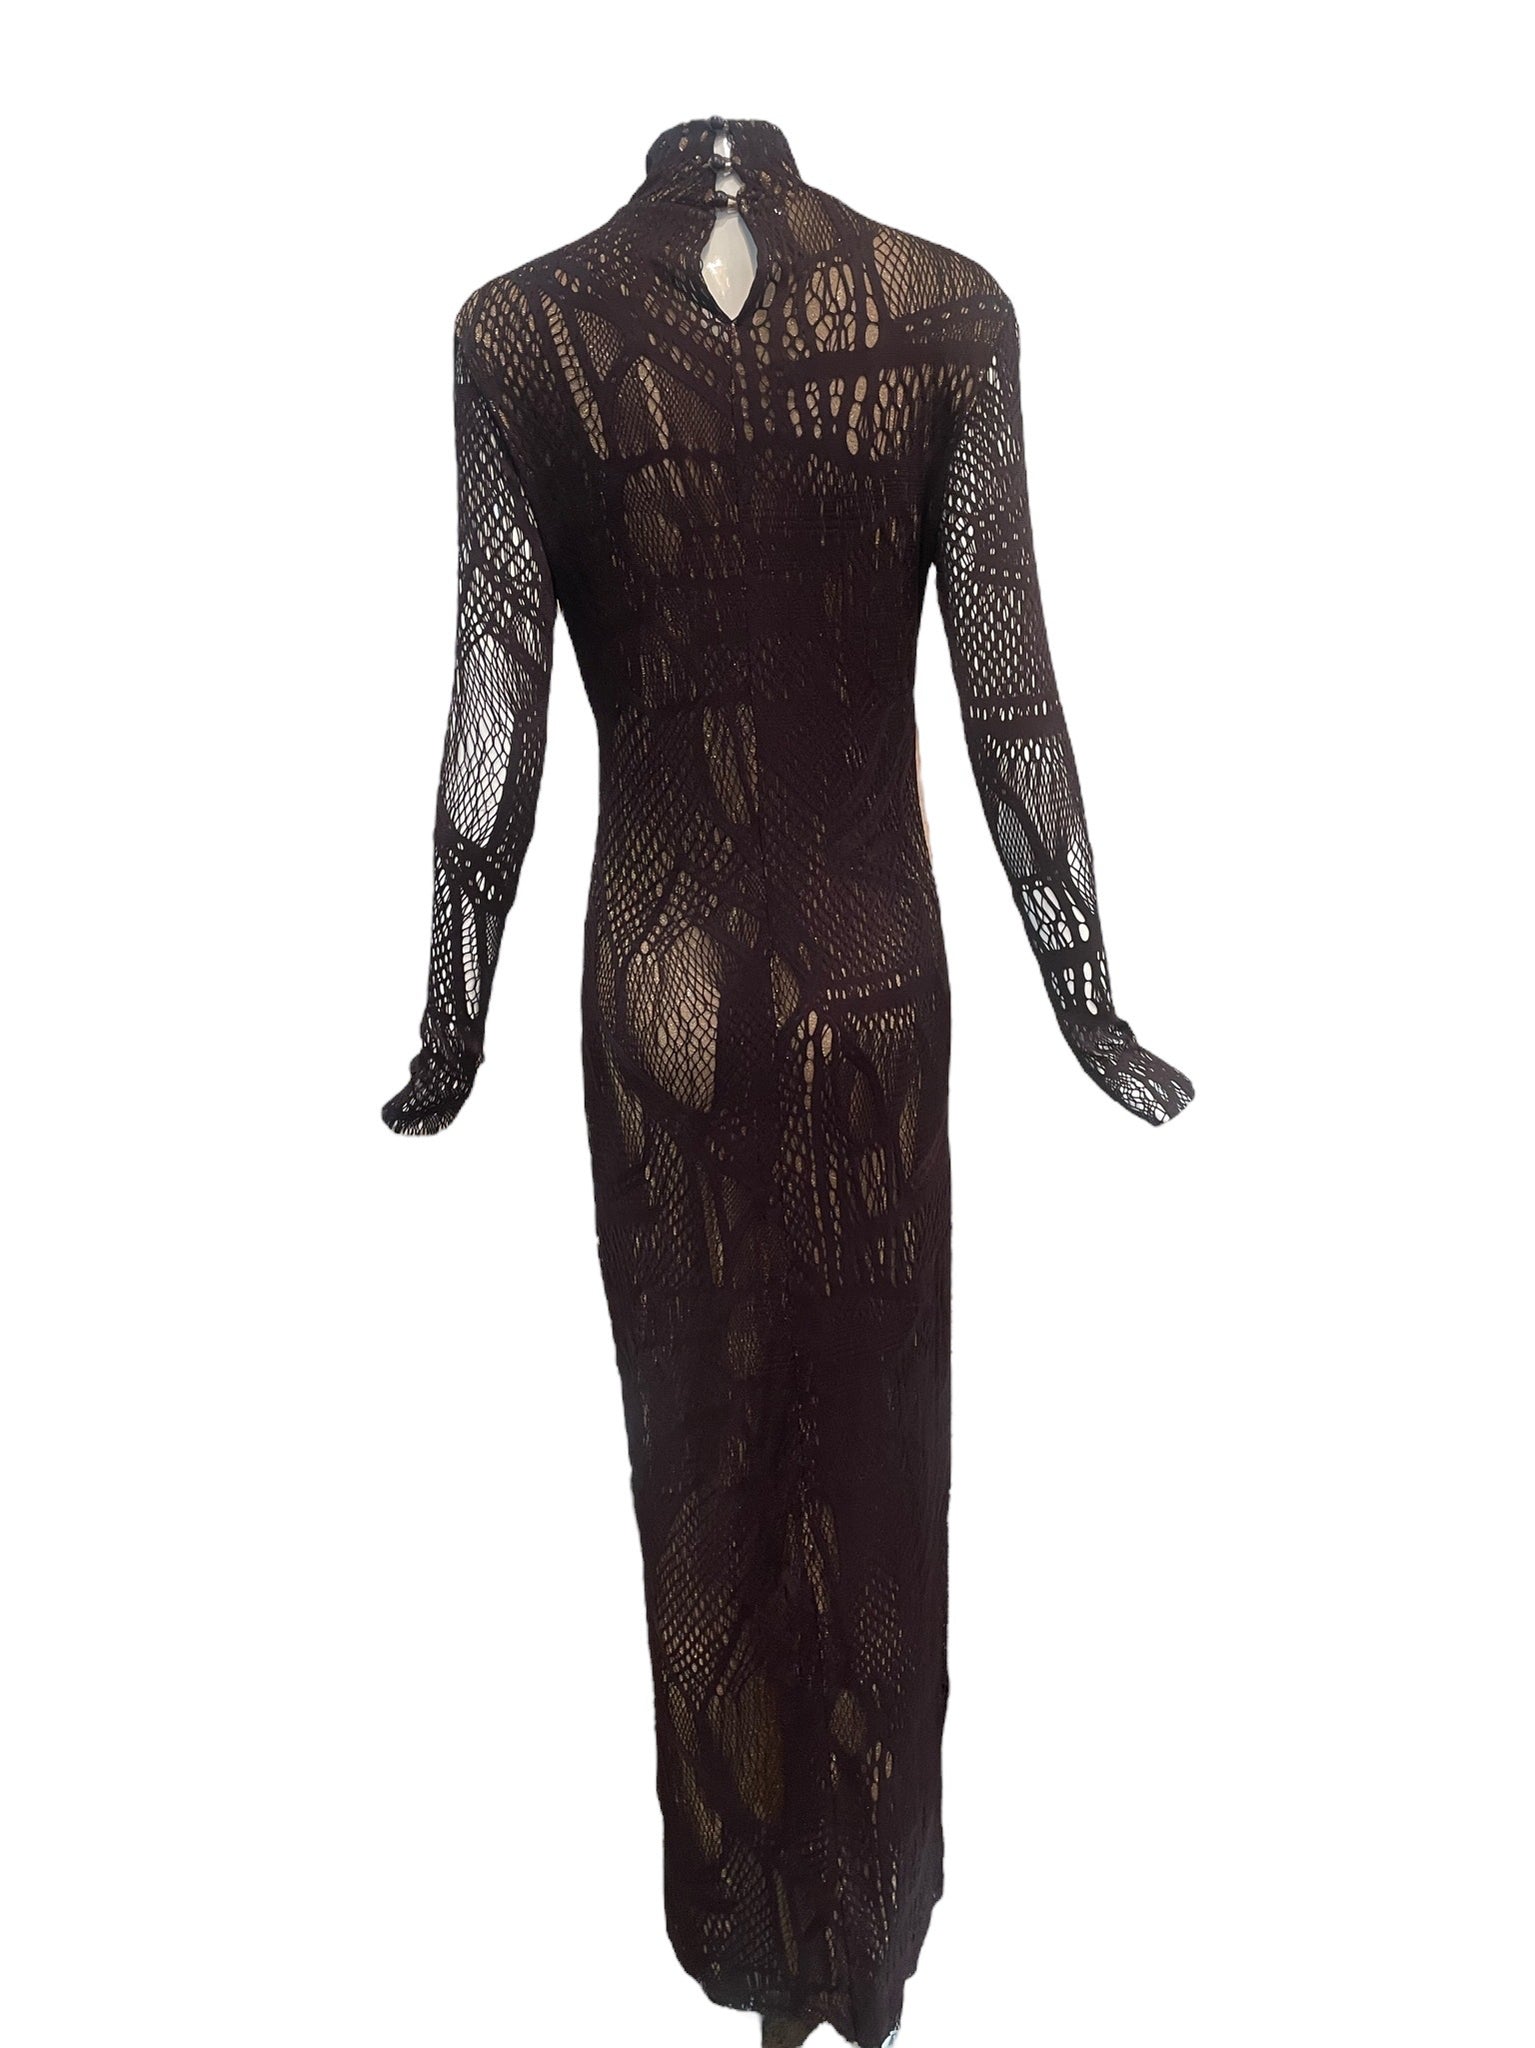 Christian Lacroix 90s Brown Mesh Gown with Cut Outs over Gold Lurex BACK 3 of 6